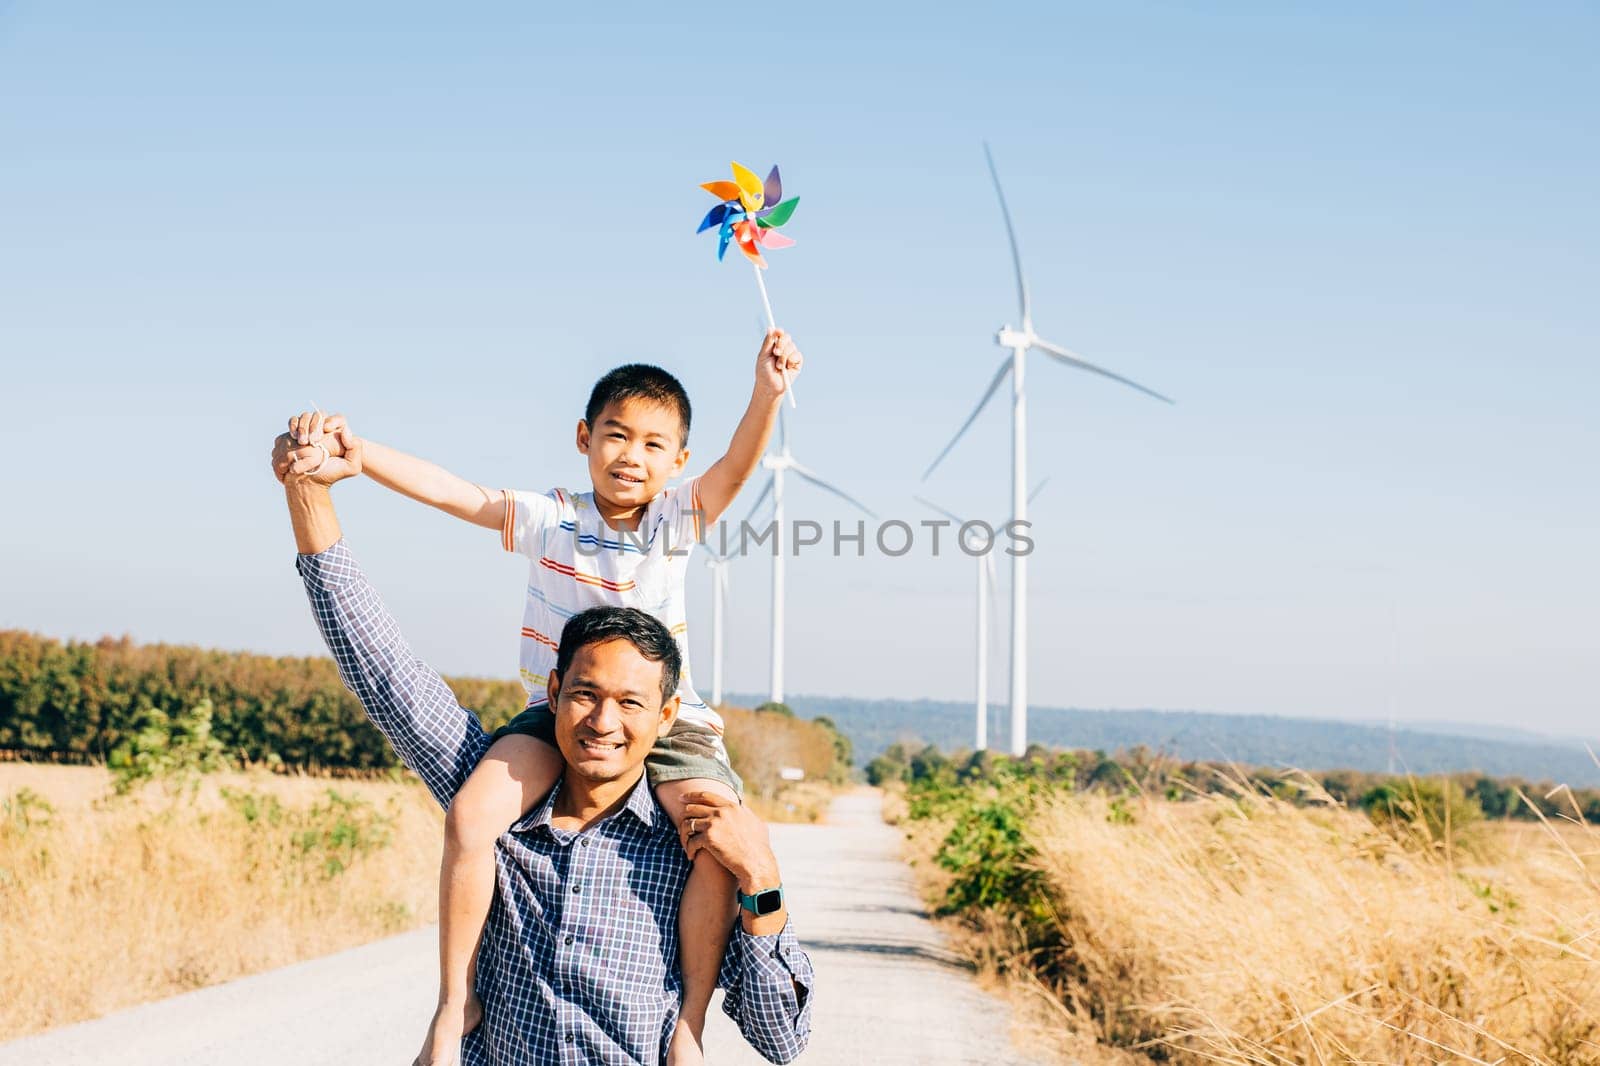 Father holds daughter with pinwheel enjoying. Family bonding near windmills signifies global innovation in renewable energy. A joyful moment in the community's pursuit of happiness. Father Day